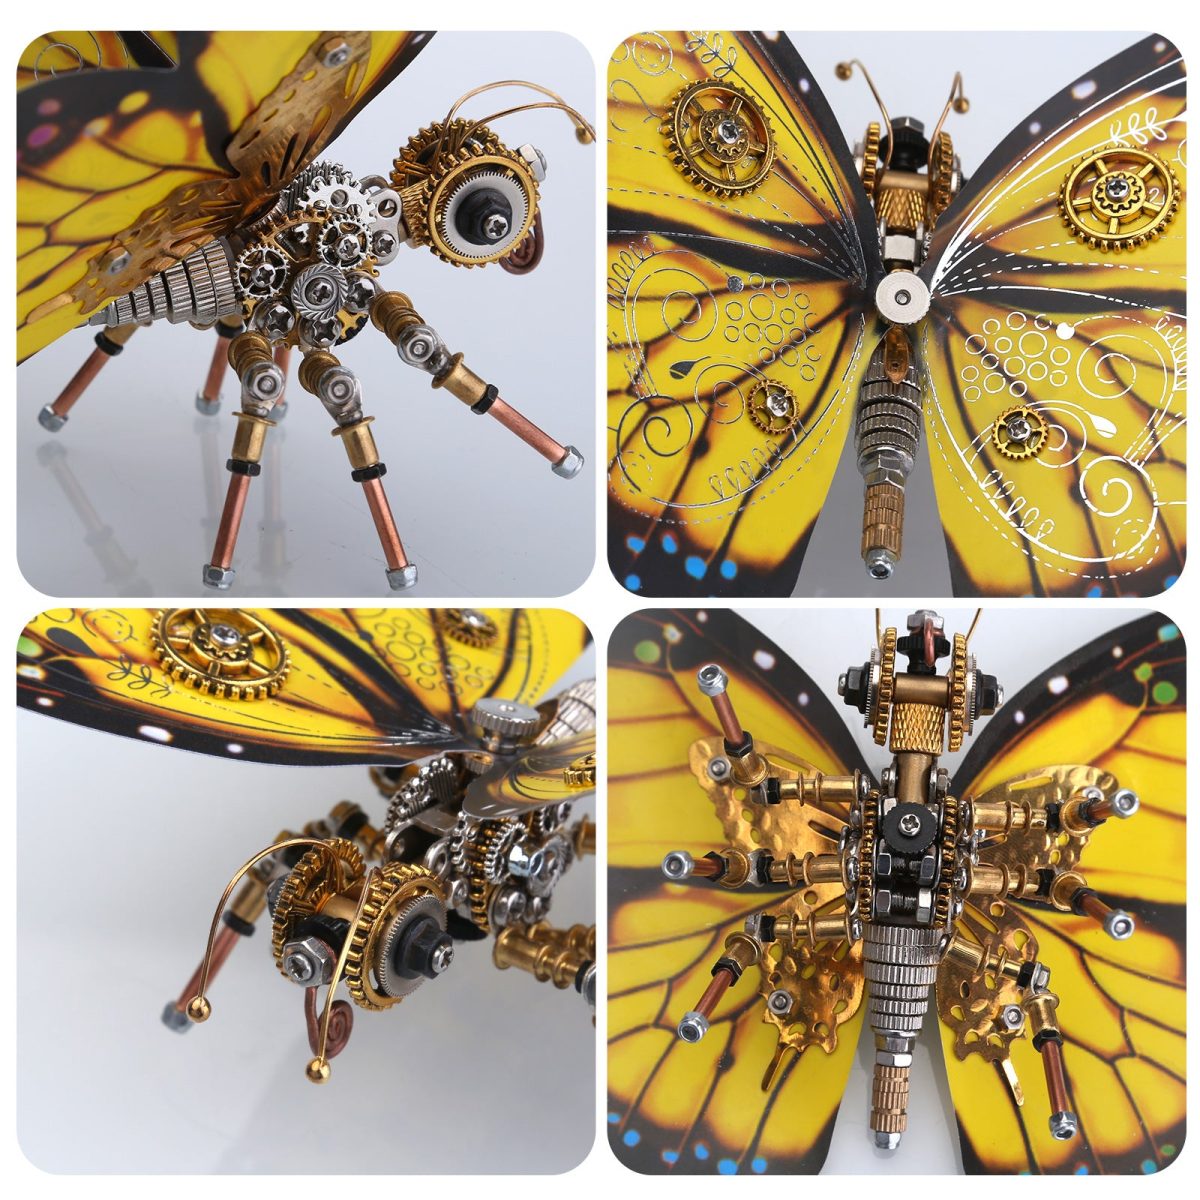 3D Metal Puzzle Tiger Swallowtail Butterfly Assembly Model